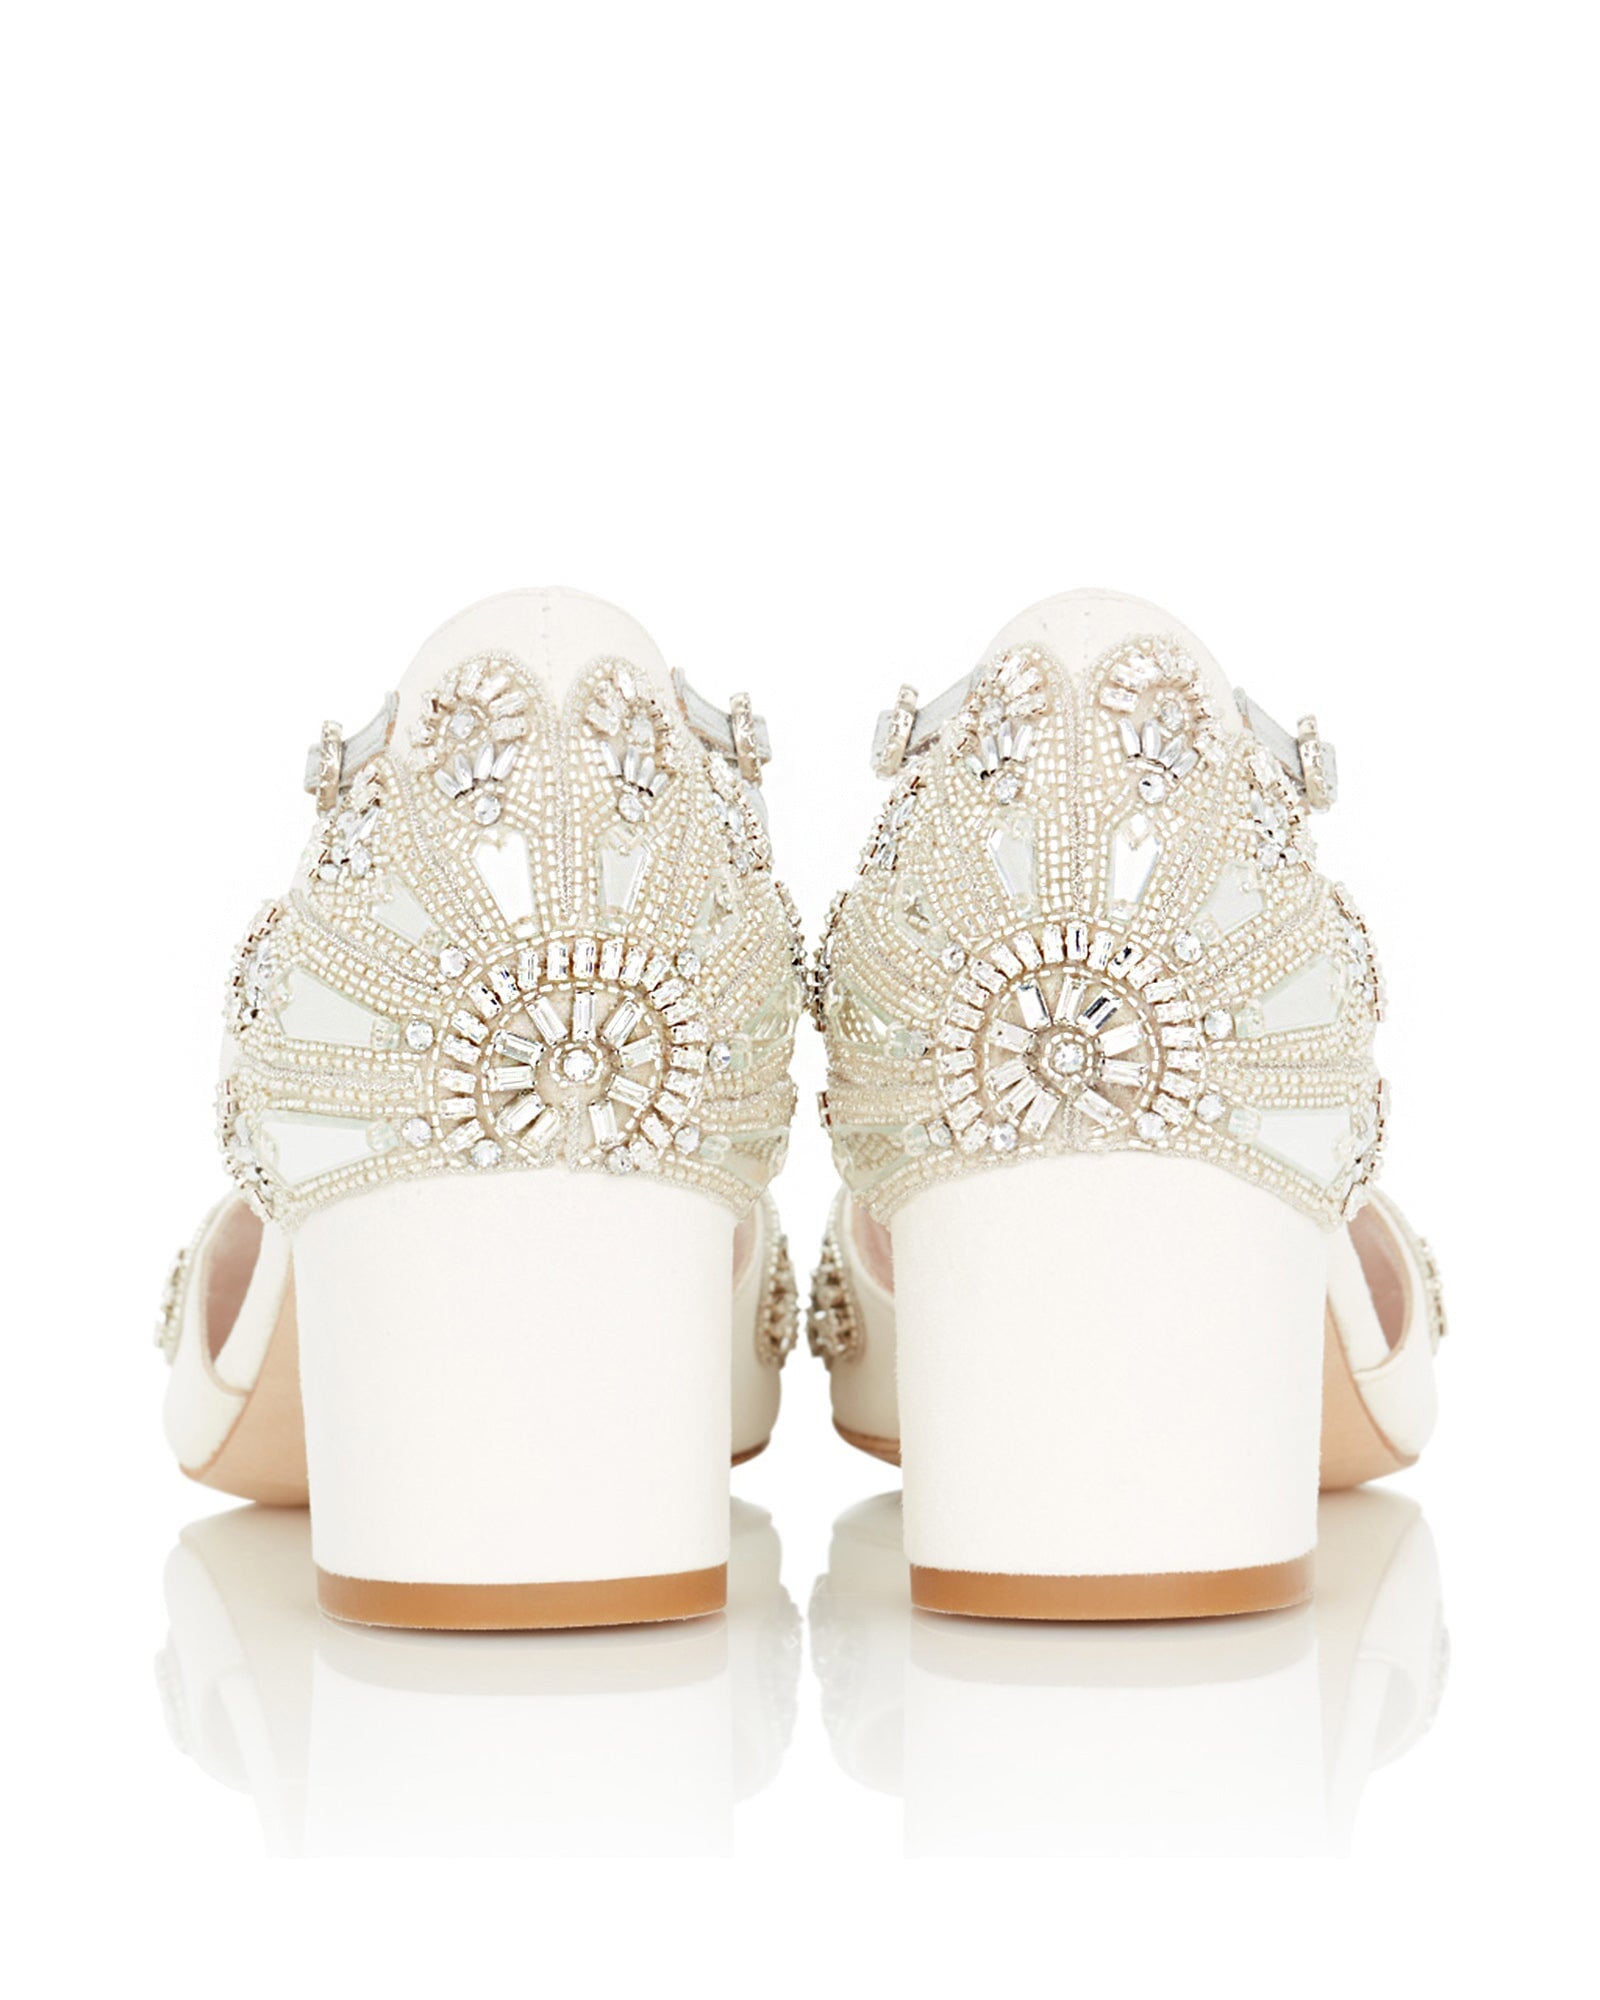 Truffle Collection bridal pointed block heels in ivory satin | ASOS